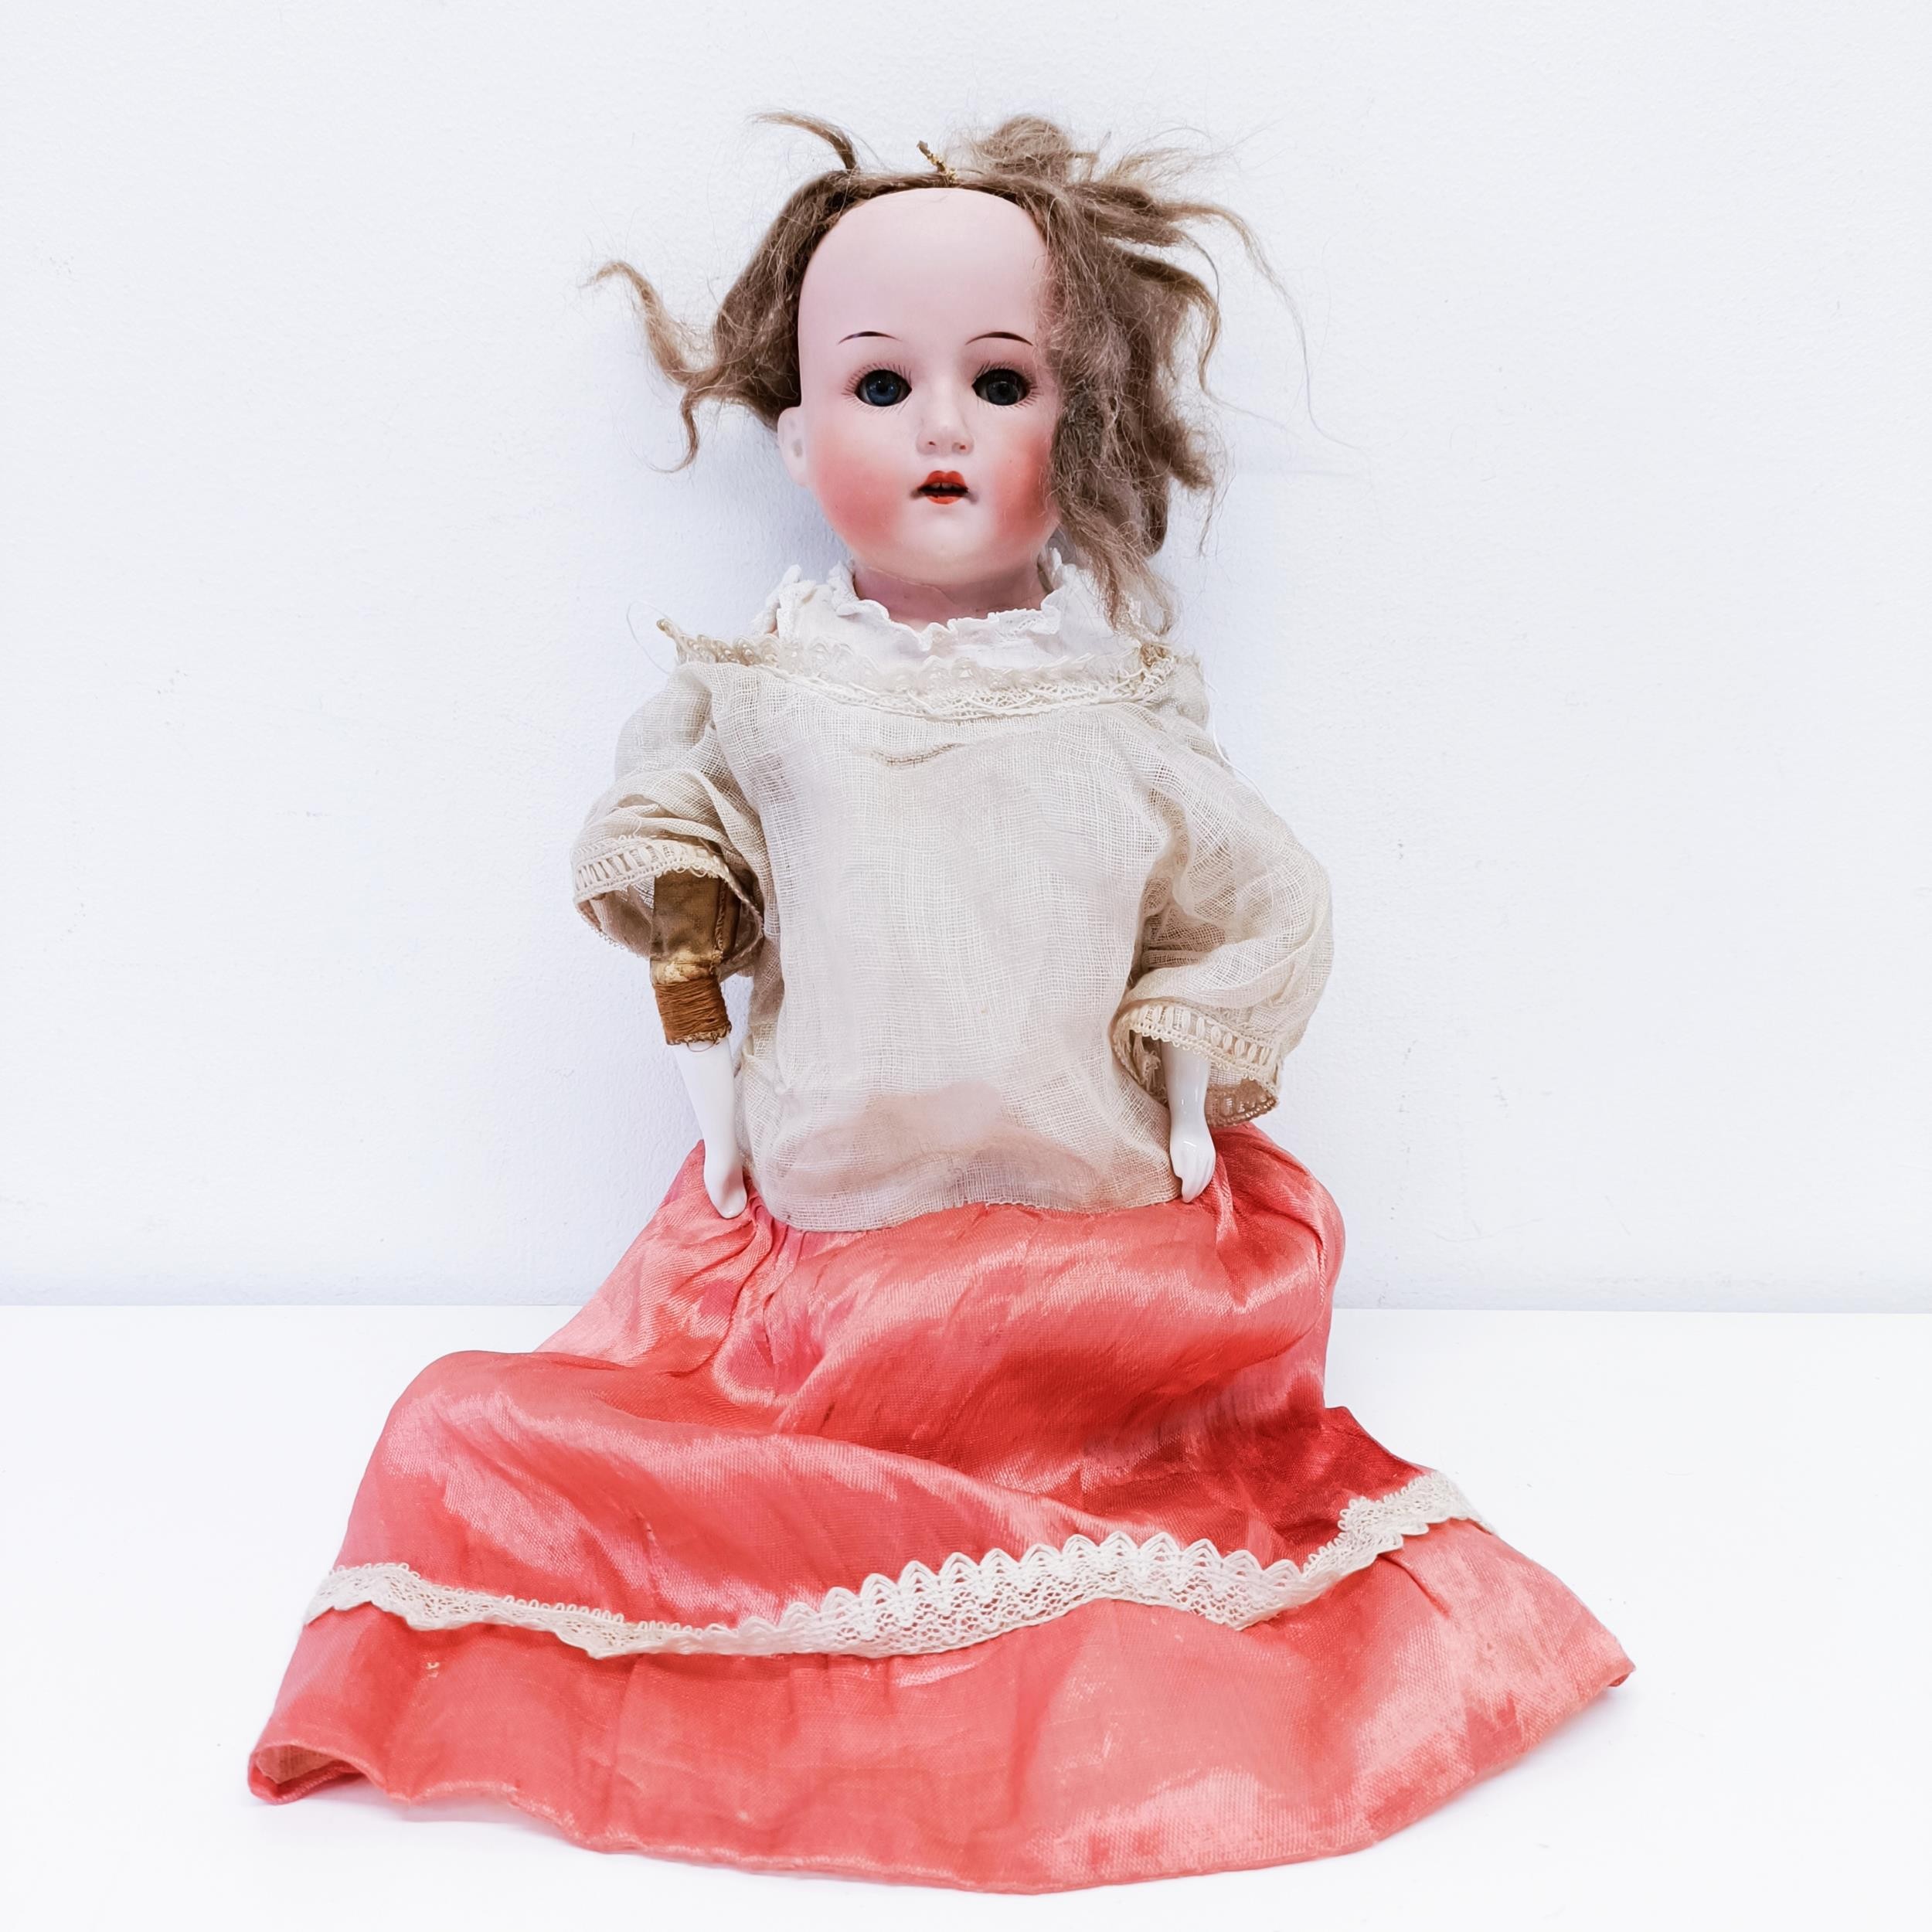 A Heubach bisque headed doll, No 275-/0, with a leather and porcelain body, and millefiori closing